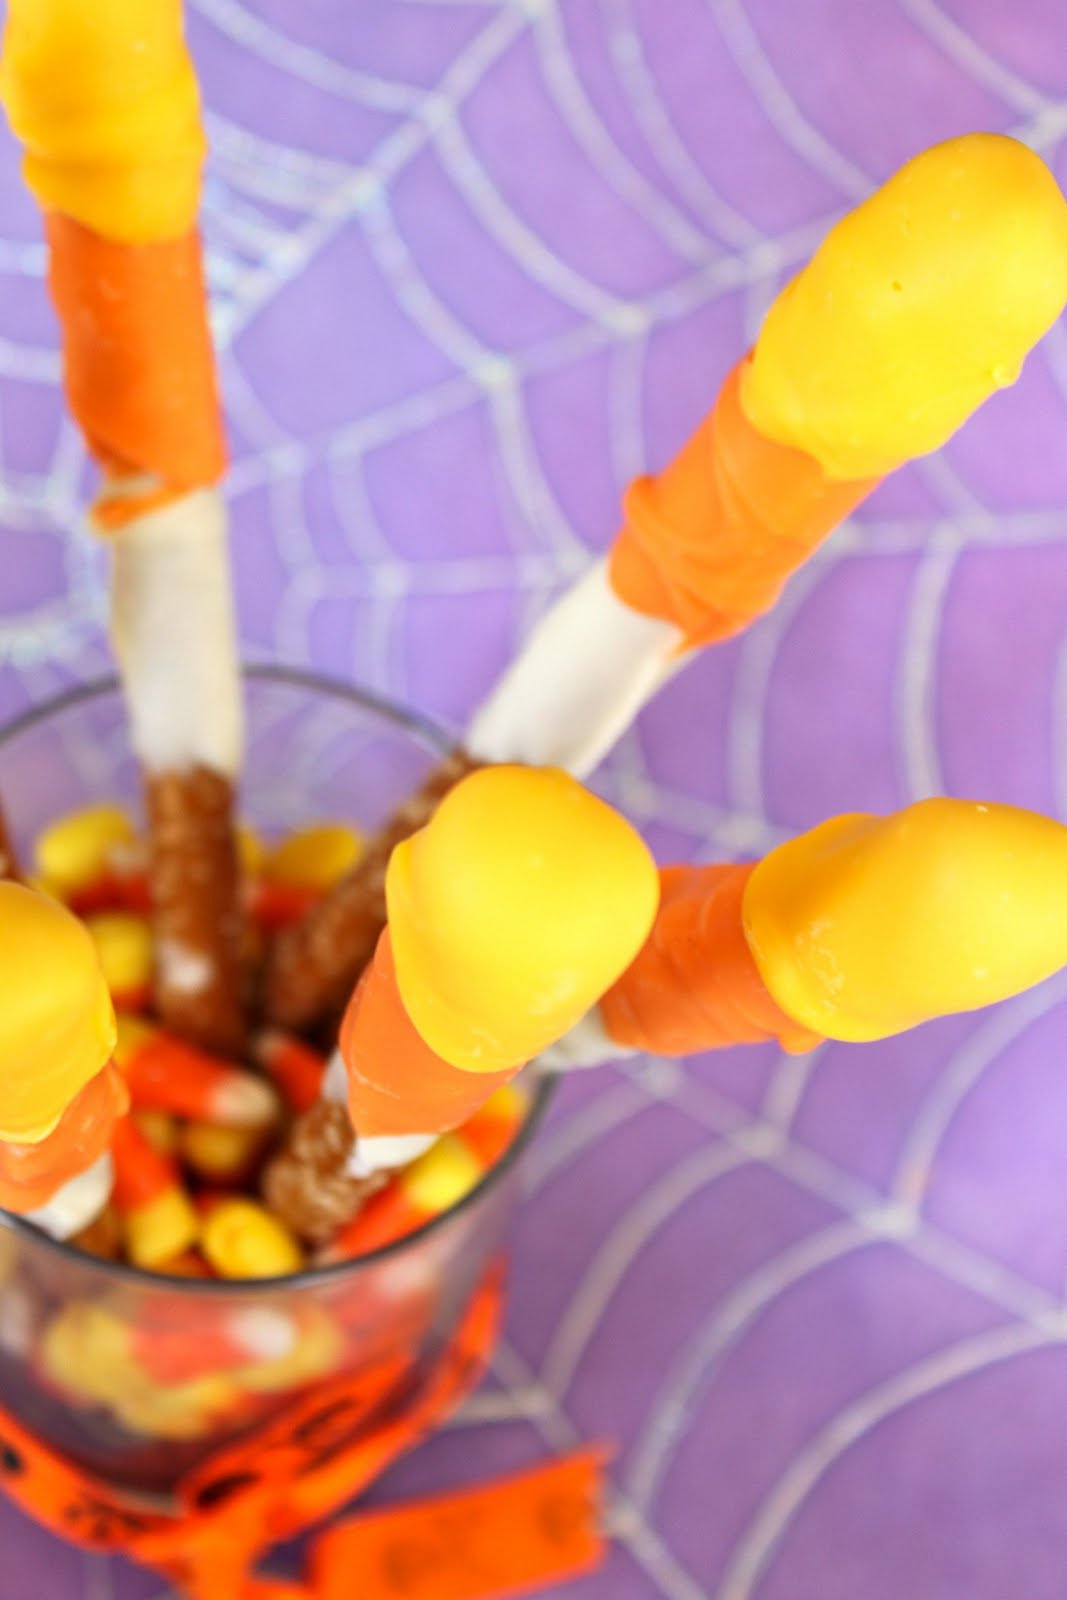 Baked Perfection: Candy Corn themed Chocolate Covered Pretzels